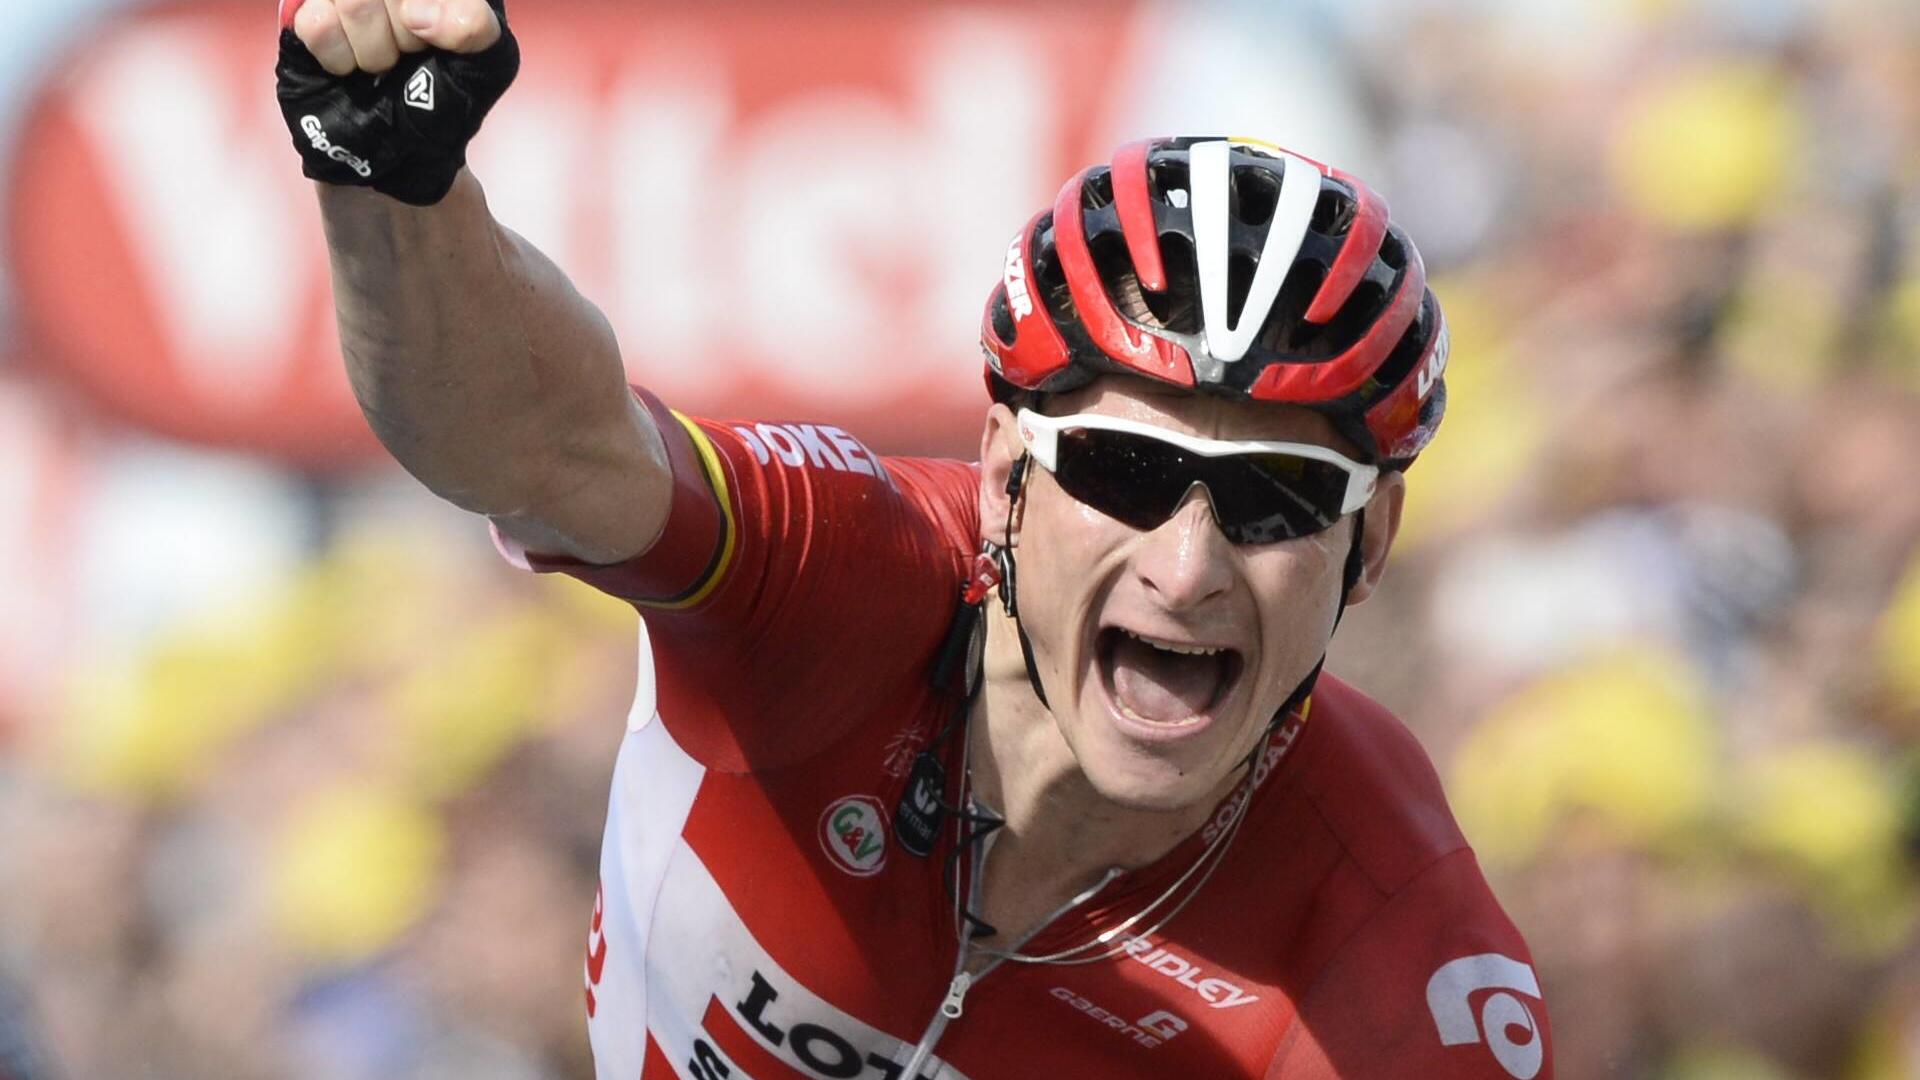 - NEELTJE JANS, NETHERLANDS: German Andre Greipel of Lotto - Soudal celebrates as he crosses the finish line to win stage 1 of the 102nd edition of the Tour de France cycling race, 166km from Utrecht to Neeltje Jans, Zeeland, The Netherlands, Sunday 05 July 2015. This year s Tour de France is taking place from 4 to 26 July. DIRKxWAEM PUBLICATIONxINxGERxSUIxAUTxONLY x04658017xNEELTJE Jans Netherlands German André Greipel of Lotto Soudal Celebrates AS He crosses The Finish Line to Win Stage 1 of The 102nd Edition of The Tour de France Cycling Race 166km From Utrecht to NEELTJE Jans Zeeland The Netherlands Sunday 05 July 2015 This Year s Tour de France is Taking Place From 4 to 26 July DIRKxWAEM PUBLICATIONxINxGERxSUIxAUTxONLY